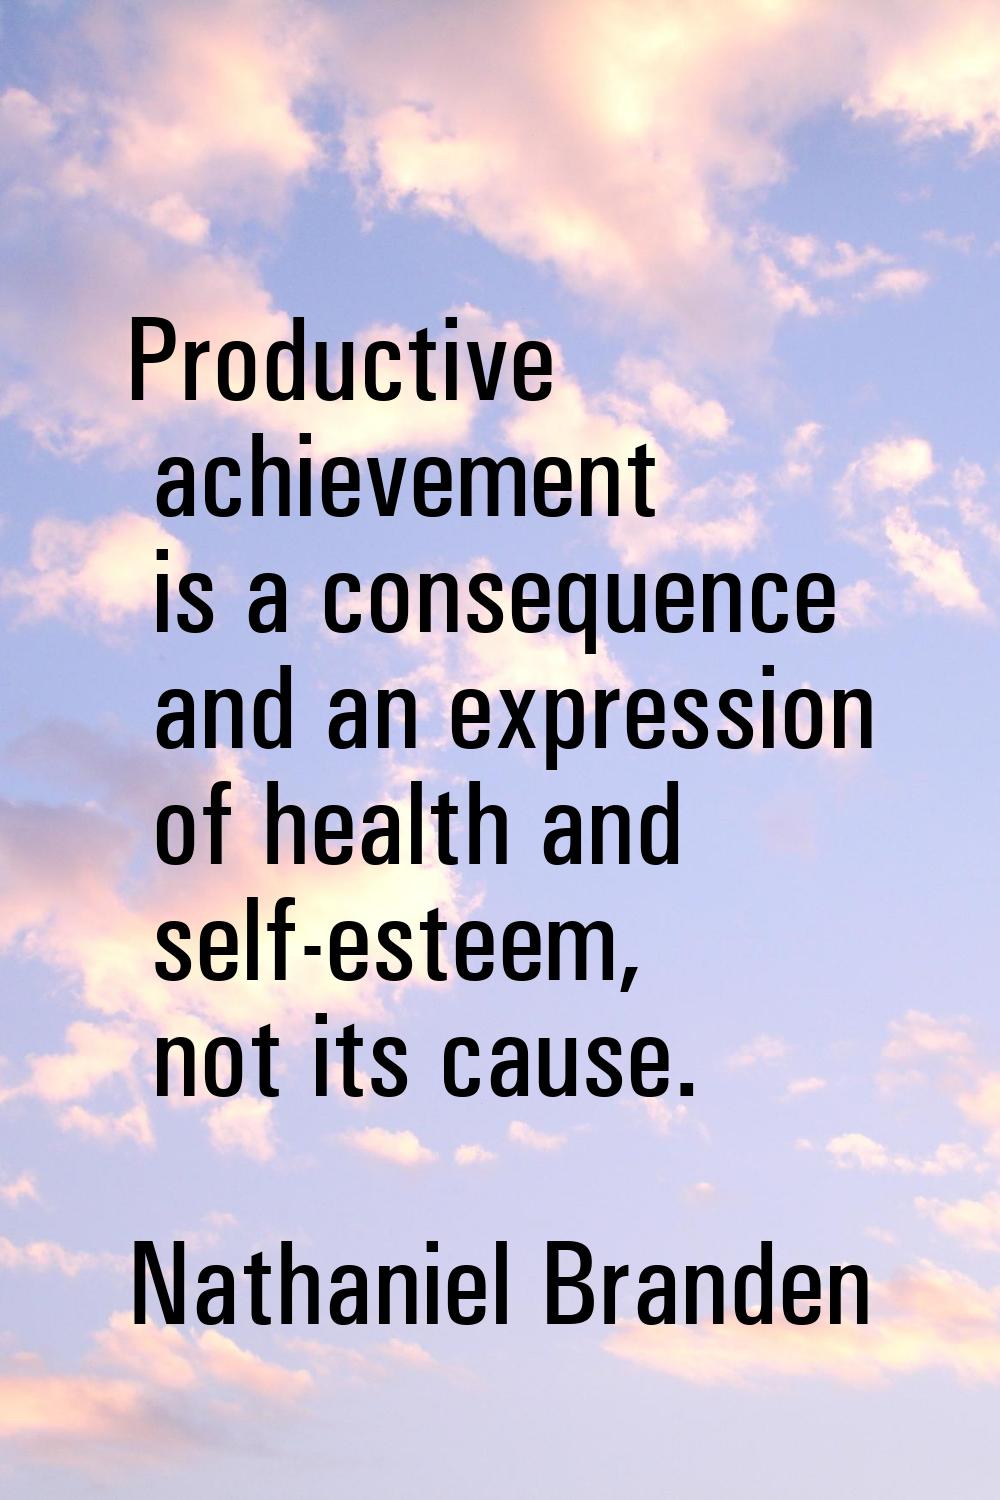 Productive achievement is a consequence and an expression of health and self-esteem, not its cause.